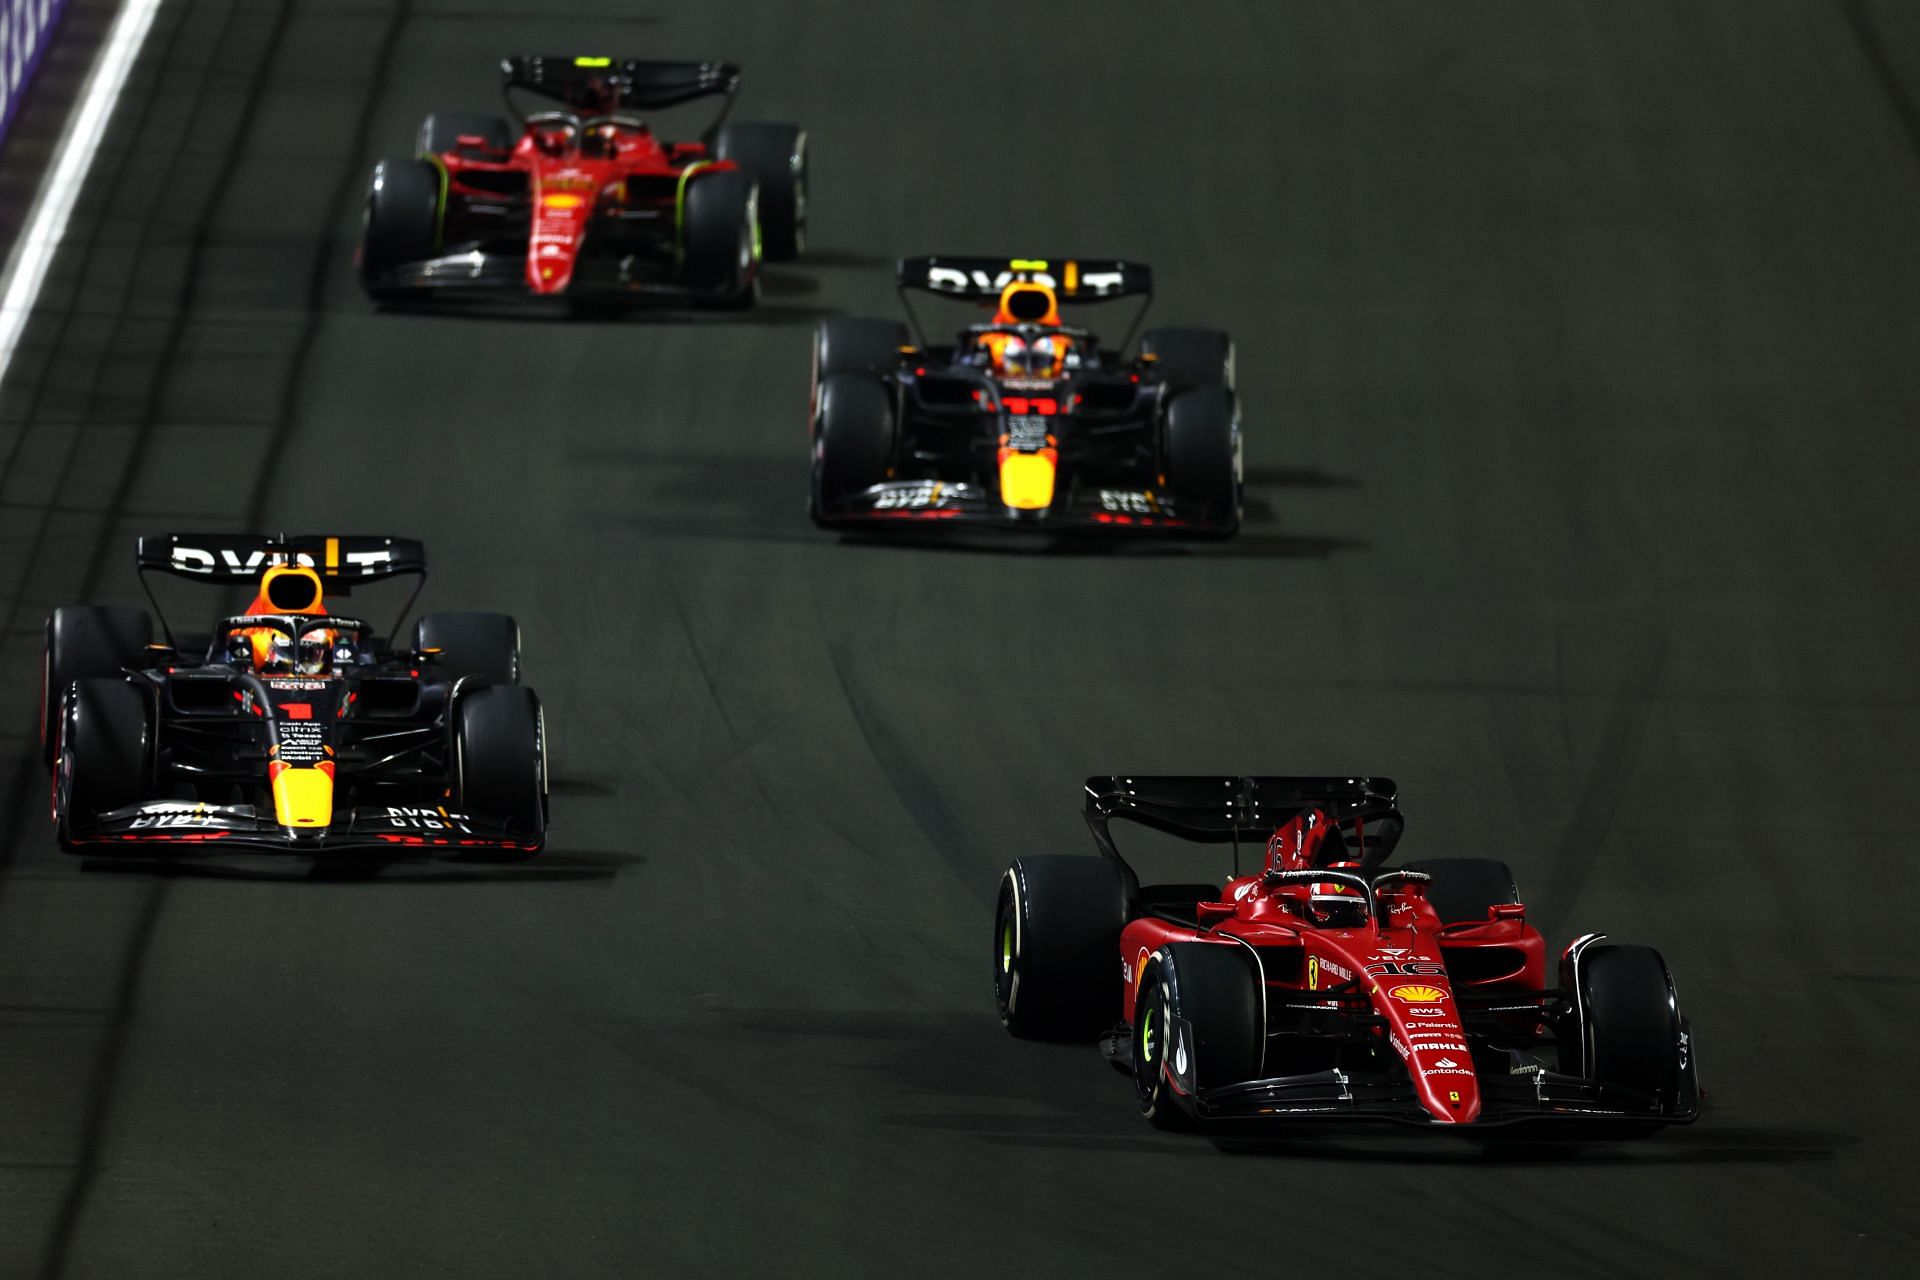 There might be a Ferrari vs Red Bull part 3 in the Australian GP